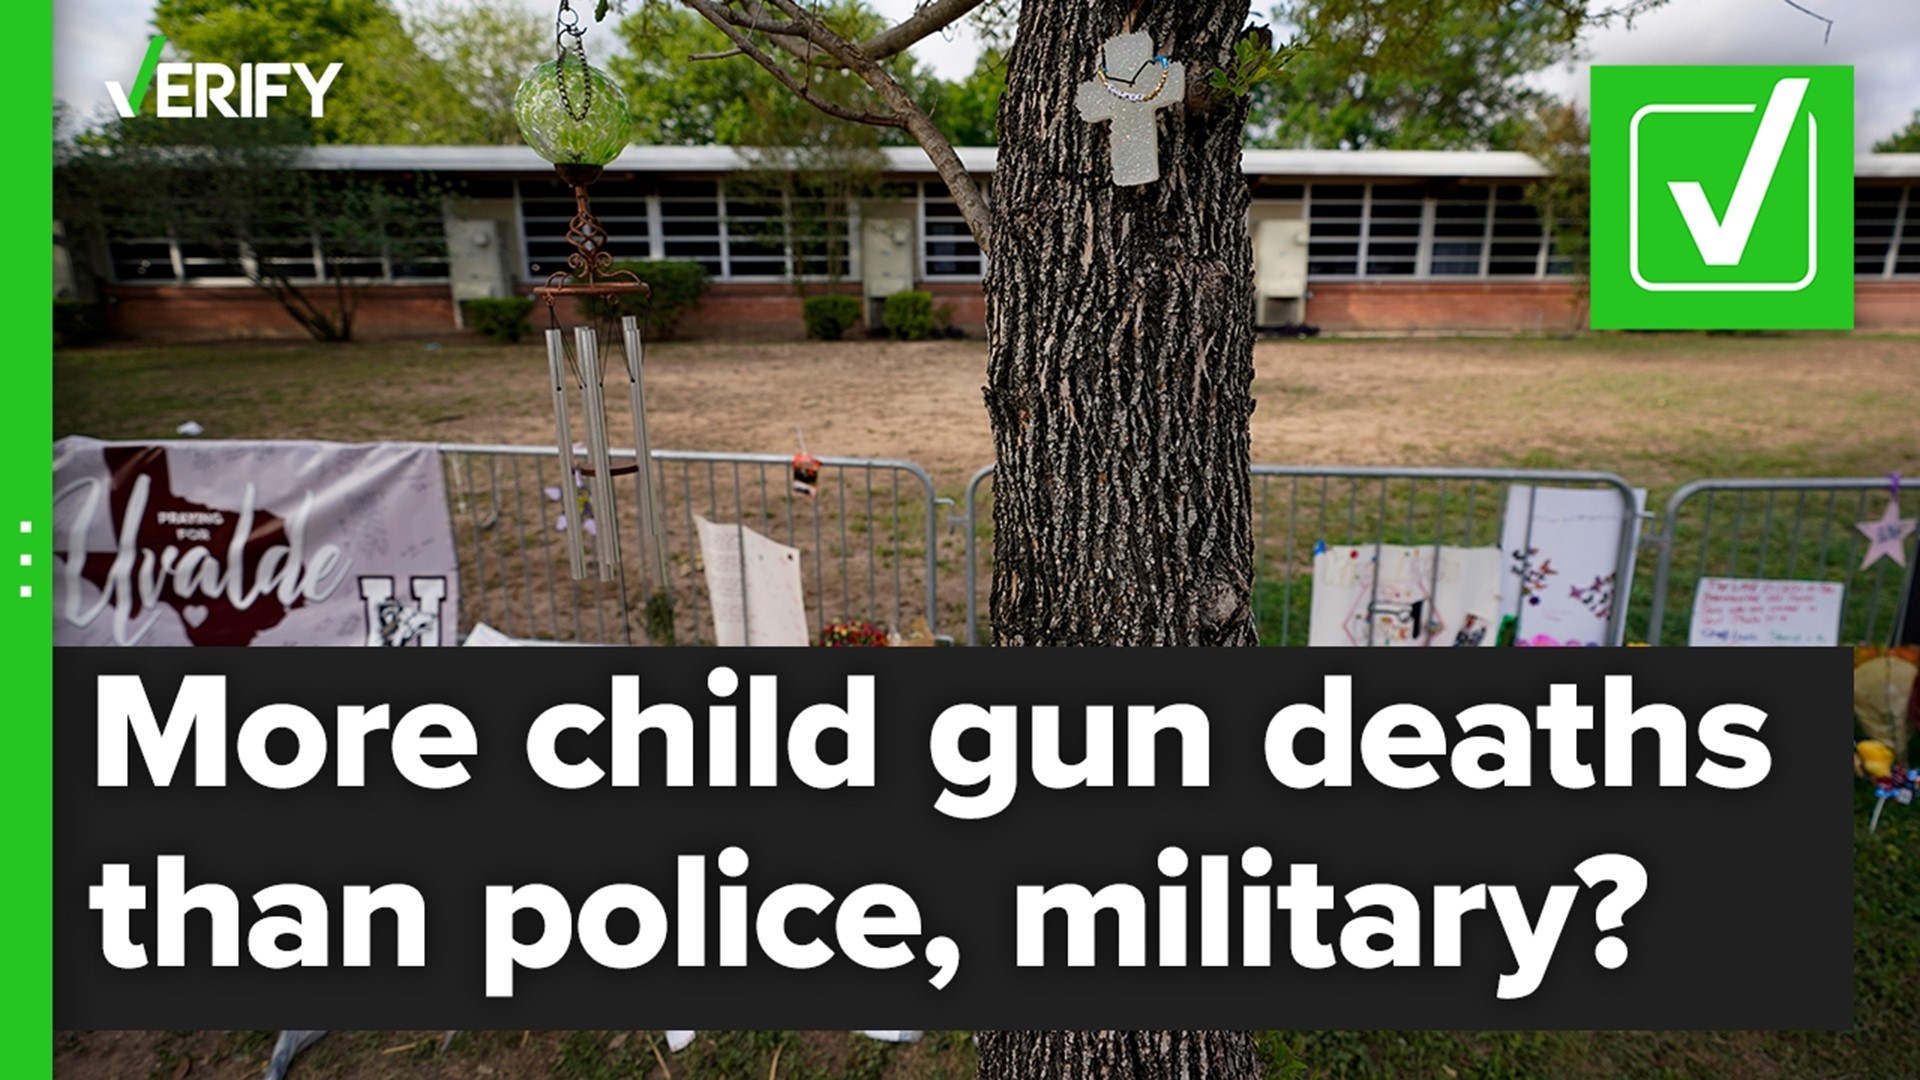 In the past two decades, there have been nearly four times more gun deaths among American children than among police and military in the line of duty combined.